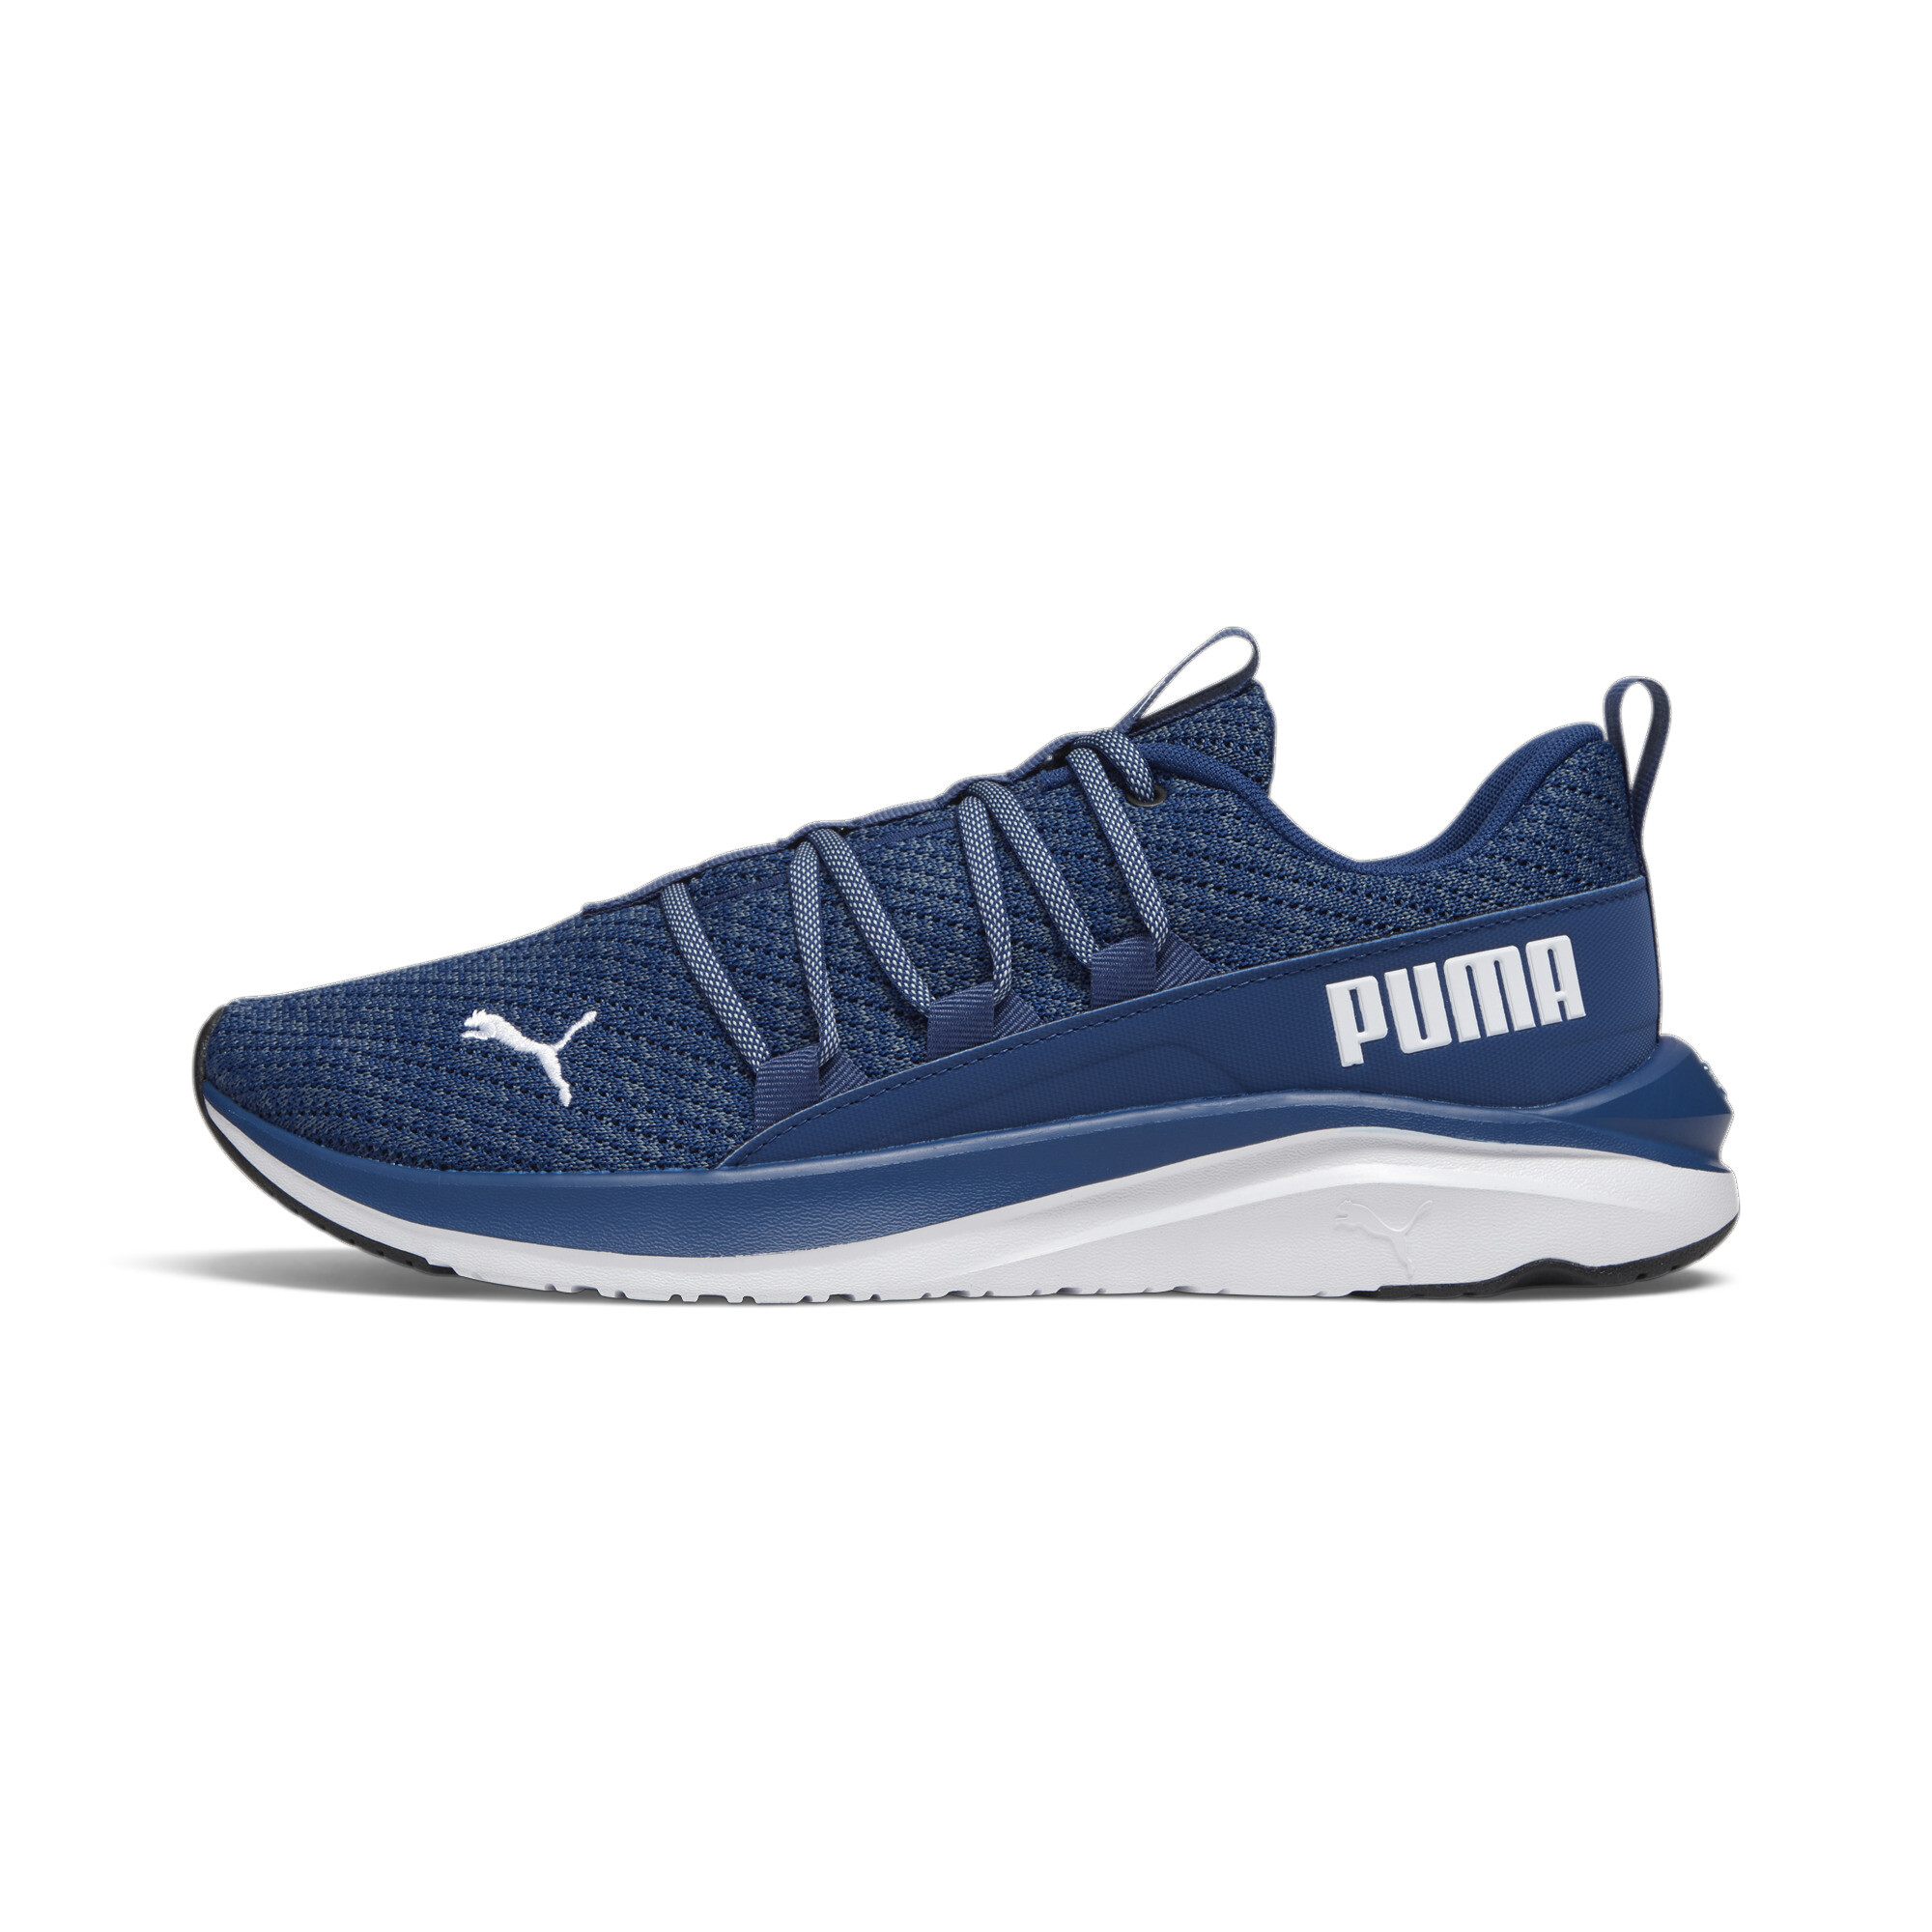 PUMA Men's SOFTRIDE One4All Knit Running Shoes | eBay